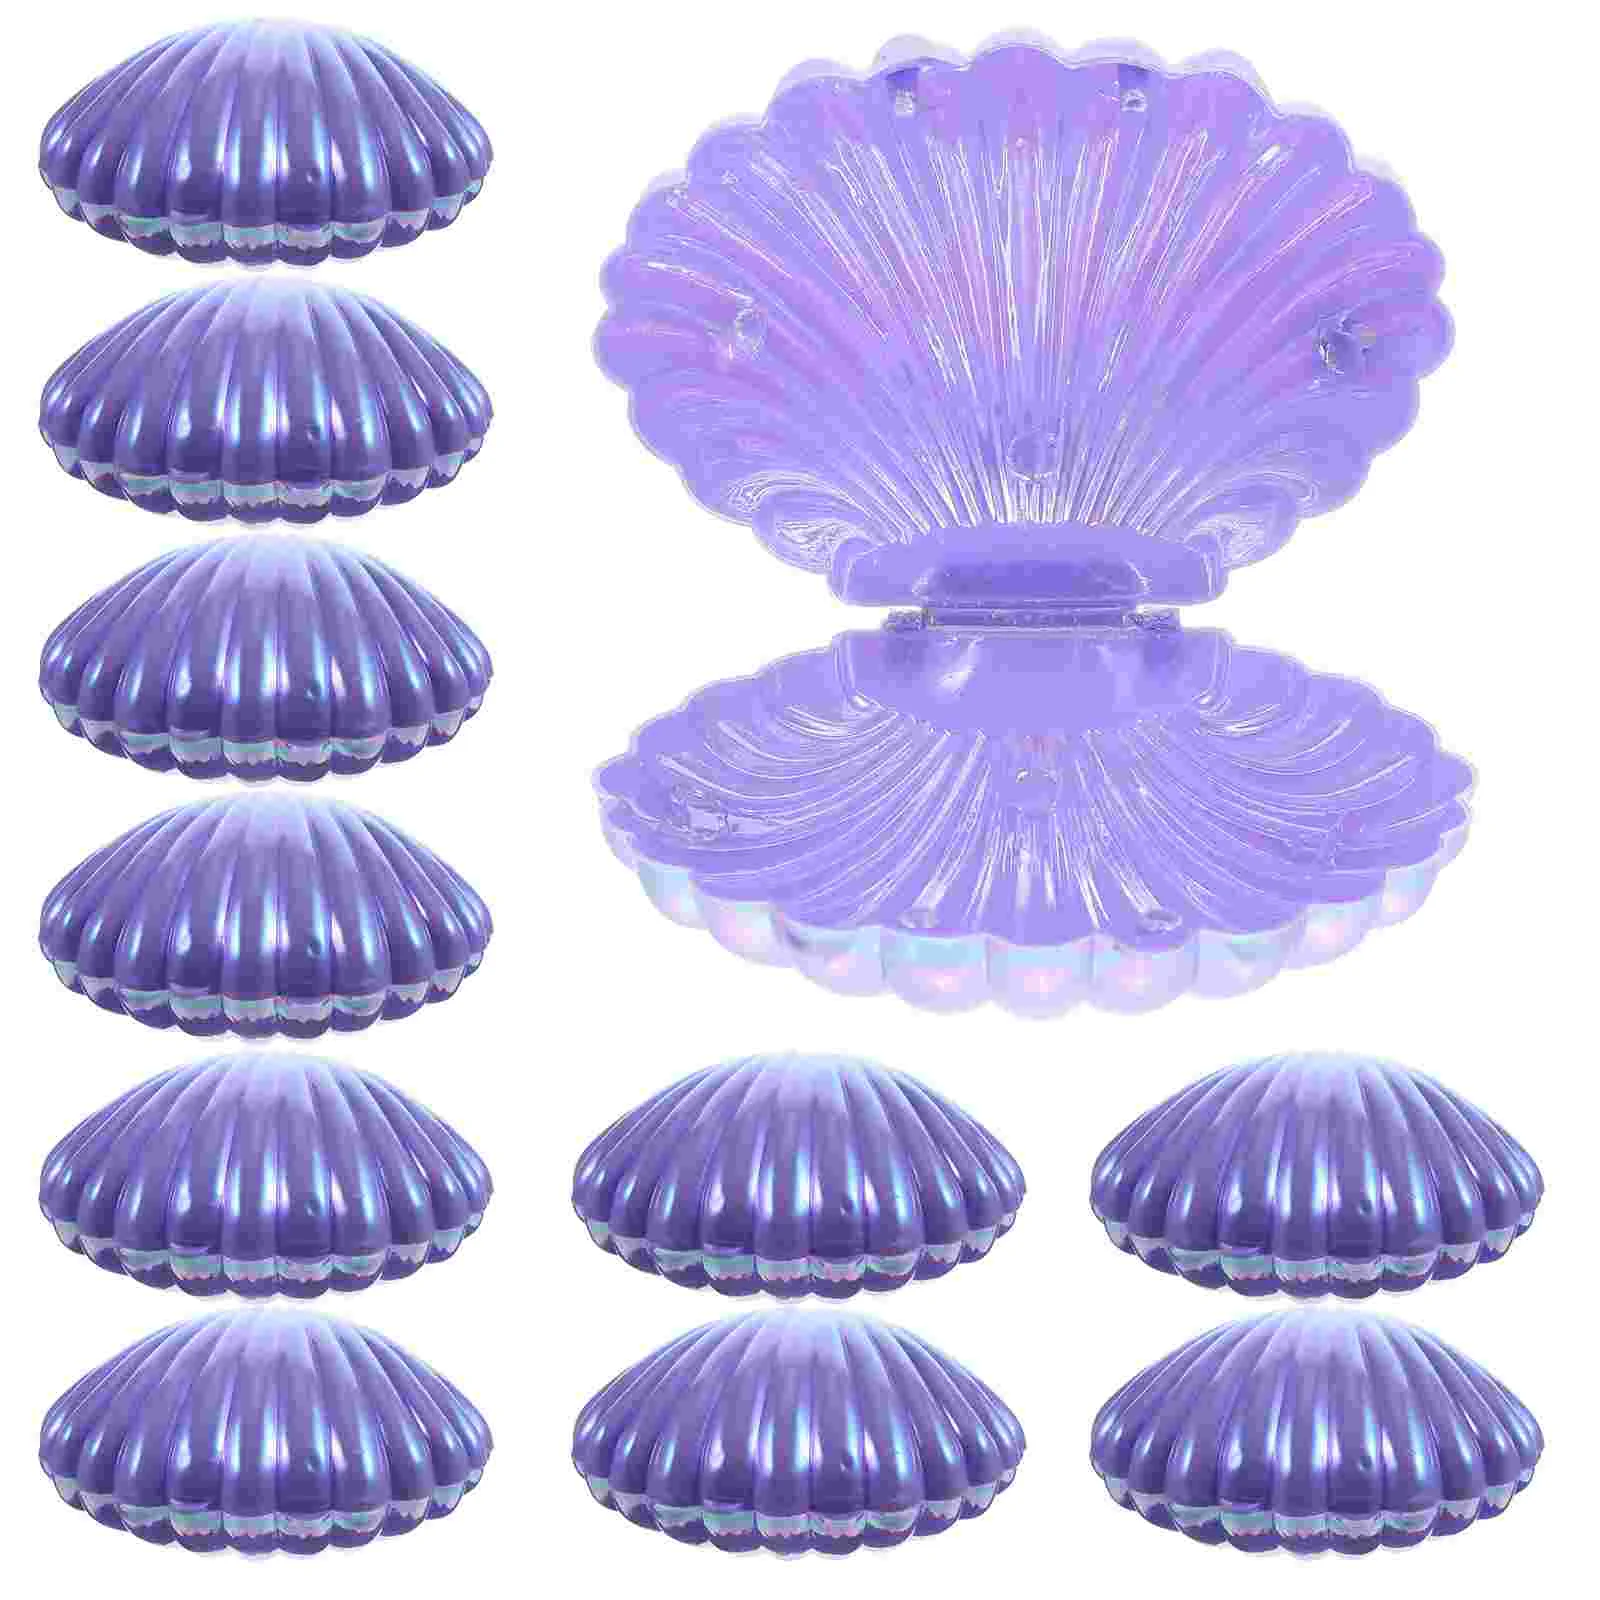 

10 Pcs Candy Box Plastic Containers Dish Party Favor Small Jar Holder Pp Seashell